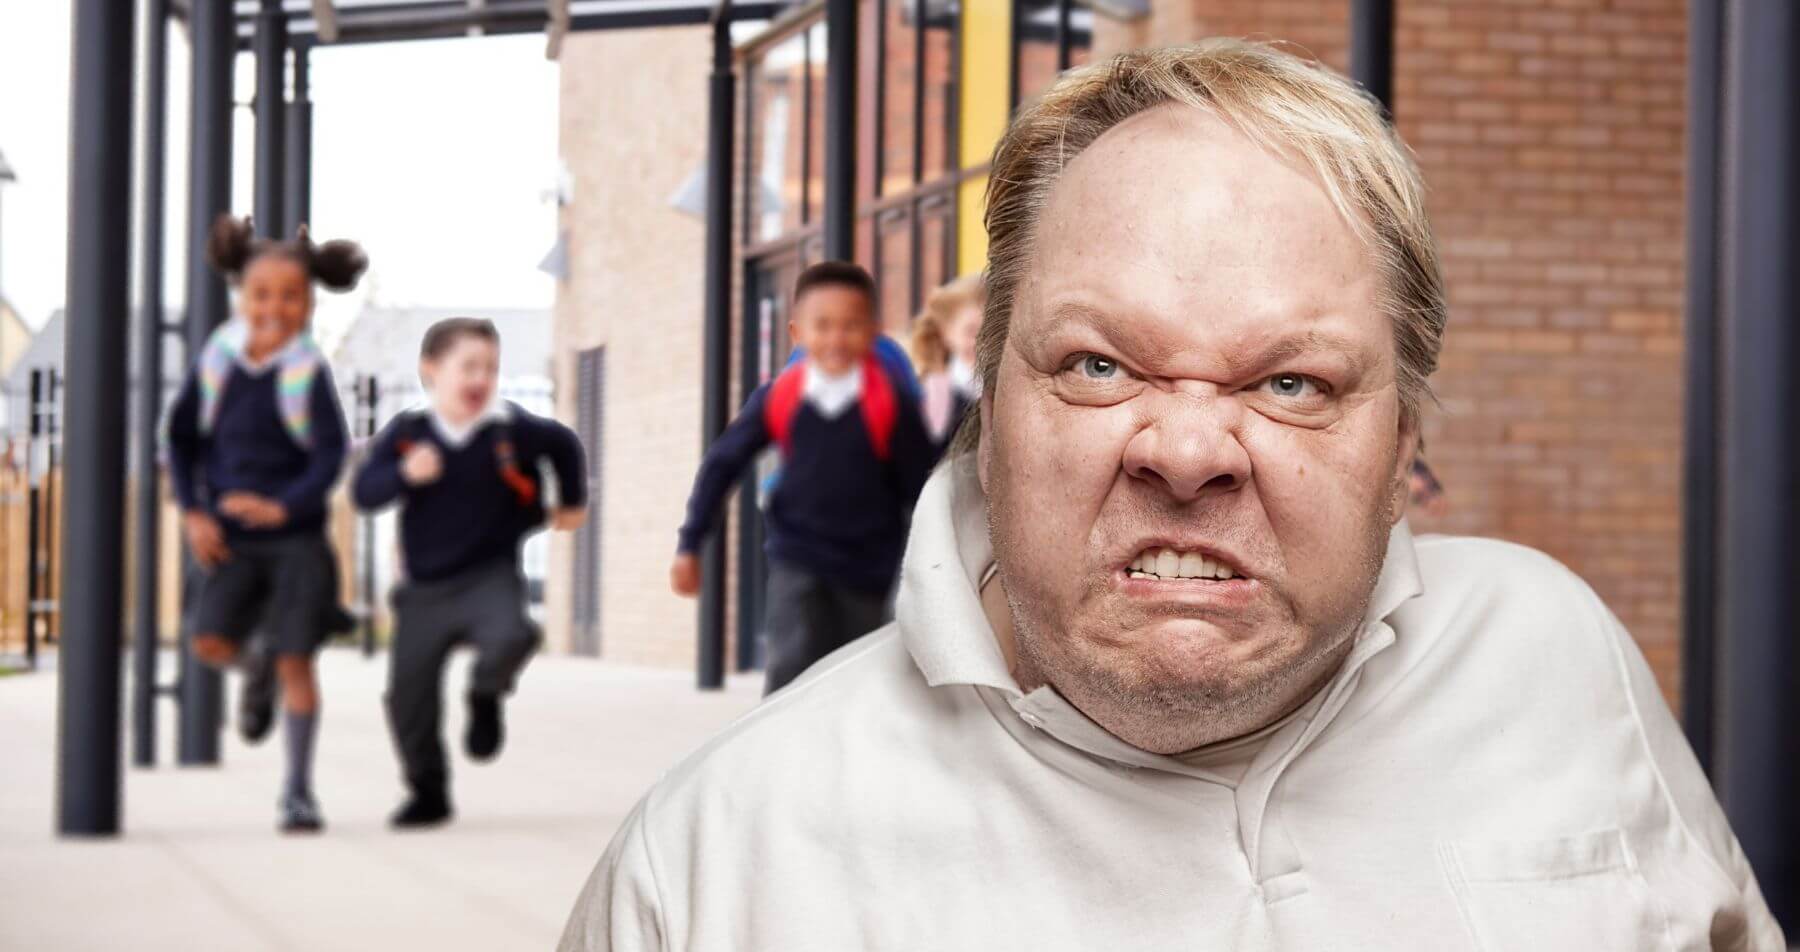 Angry man at a school